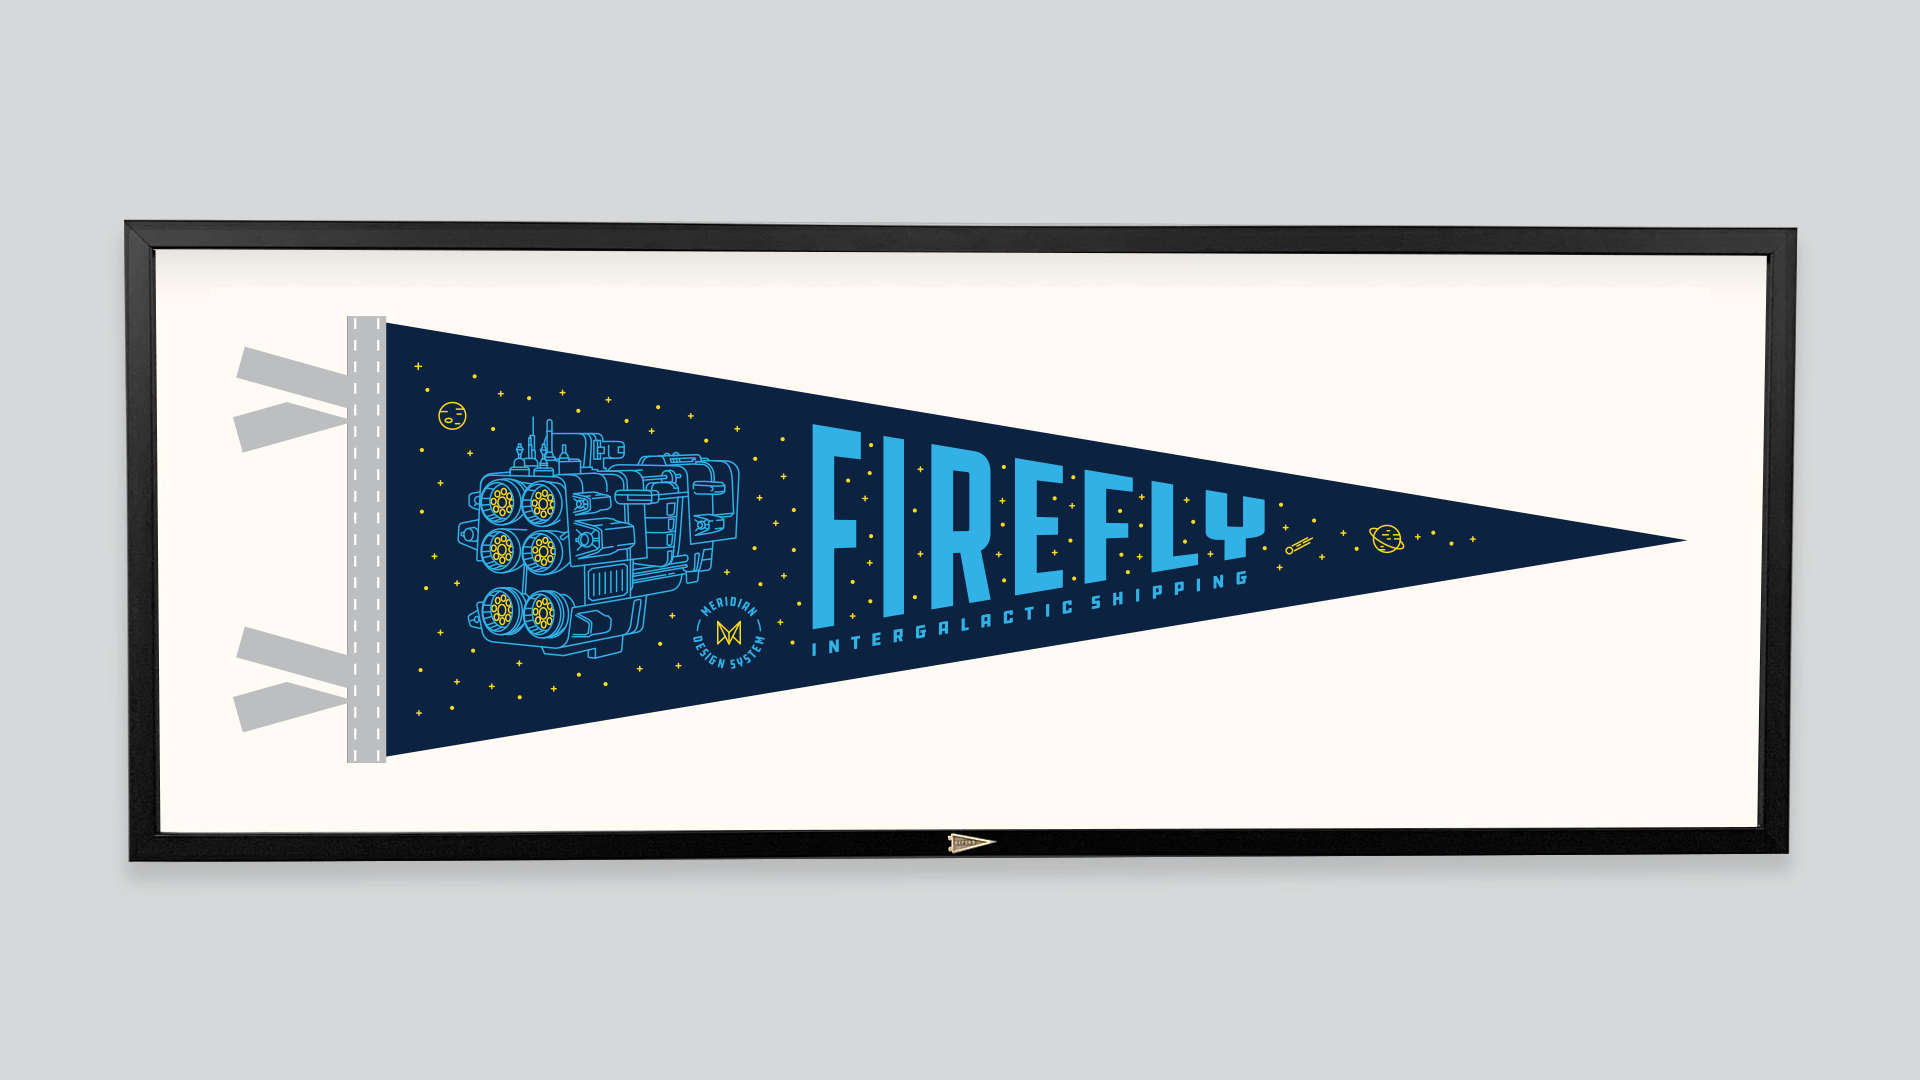 Firefly pennant printed by Oxford Pennants in Buffalo, NY.